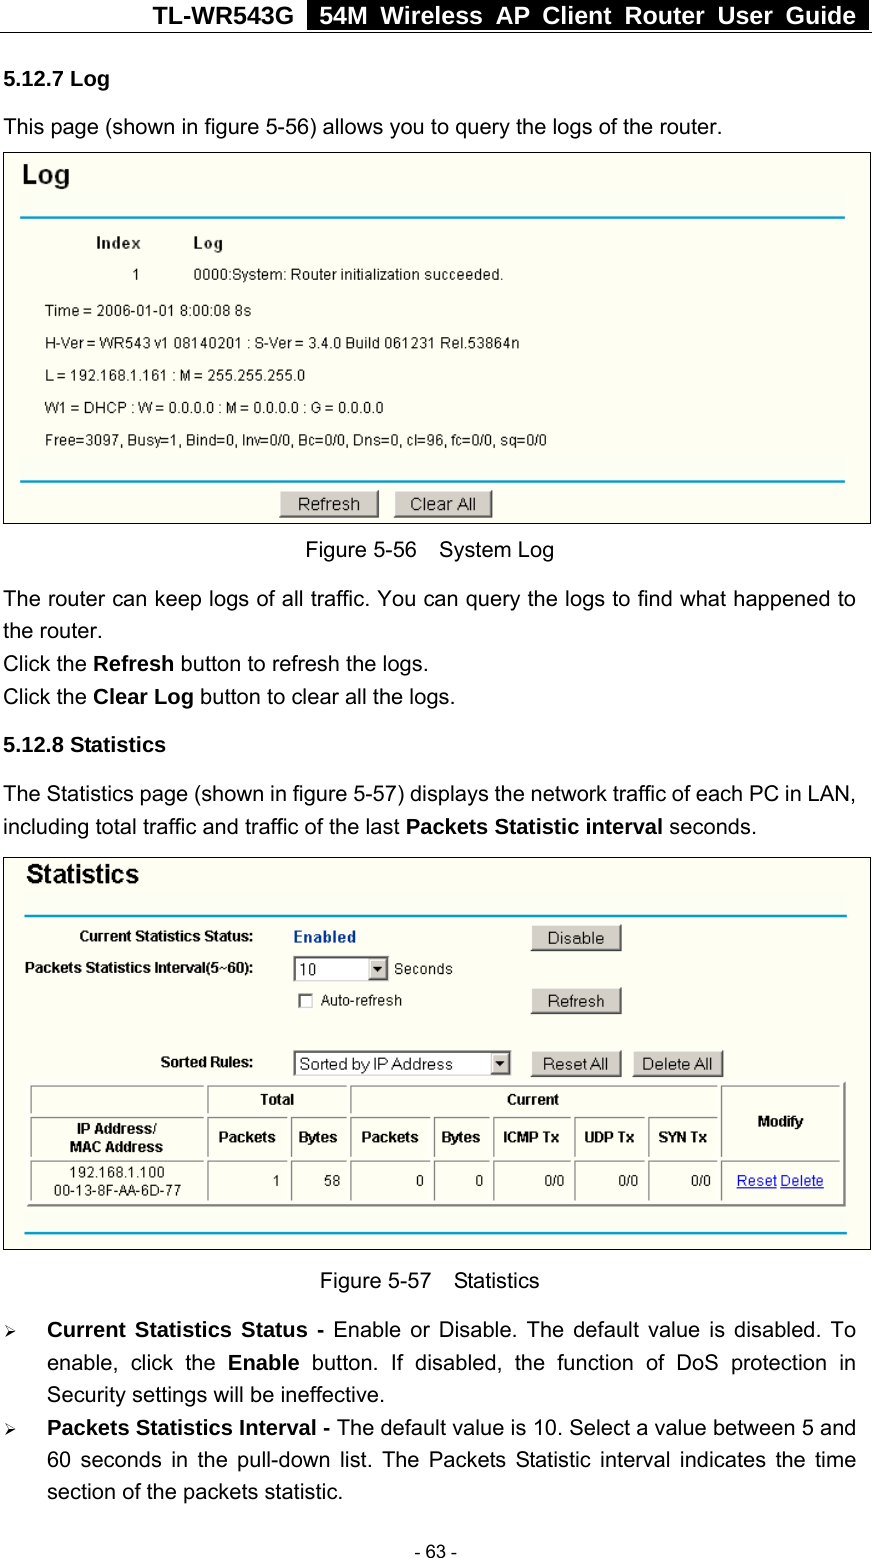 TL-WR543G   54M Wireless AP Client Router User Guide  5.12.7 Log This page (shown in figure 5-56) allows you to query the logs of the router.    Figure 5-56  System Log The router can keep logs of all traffic. You can query the logs to find what happened to the router. Click the Refresh button to refresh the logs. Click the Clear Log button to clear all the logs. 5.12.8 Statistics The Statistics page (shown in figure 5-57) displays the network traffic of each PC in LAN, including total traffic and traffic of the last Packets Statistic interval seconds.    Figure 5-57  Statistics ¾ Current Statistics Status - Enable or Disable. The default value is disabled. To enable, click the Enable button. If disabled, the function of DoS protection in Security settings will be ineffective.   ¾ Packets Statistics Interval - The default value is 10. Select a value between 5 and 60 seconds in the pull-down list. The Packets Statistic interval indicates the time section of the packets statistic.    - 63 - 